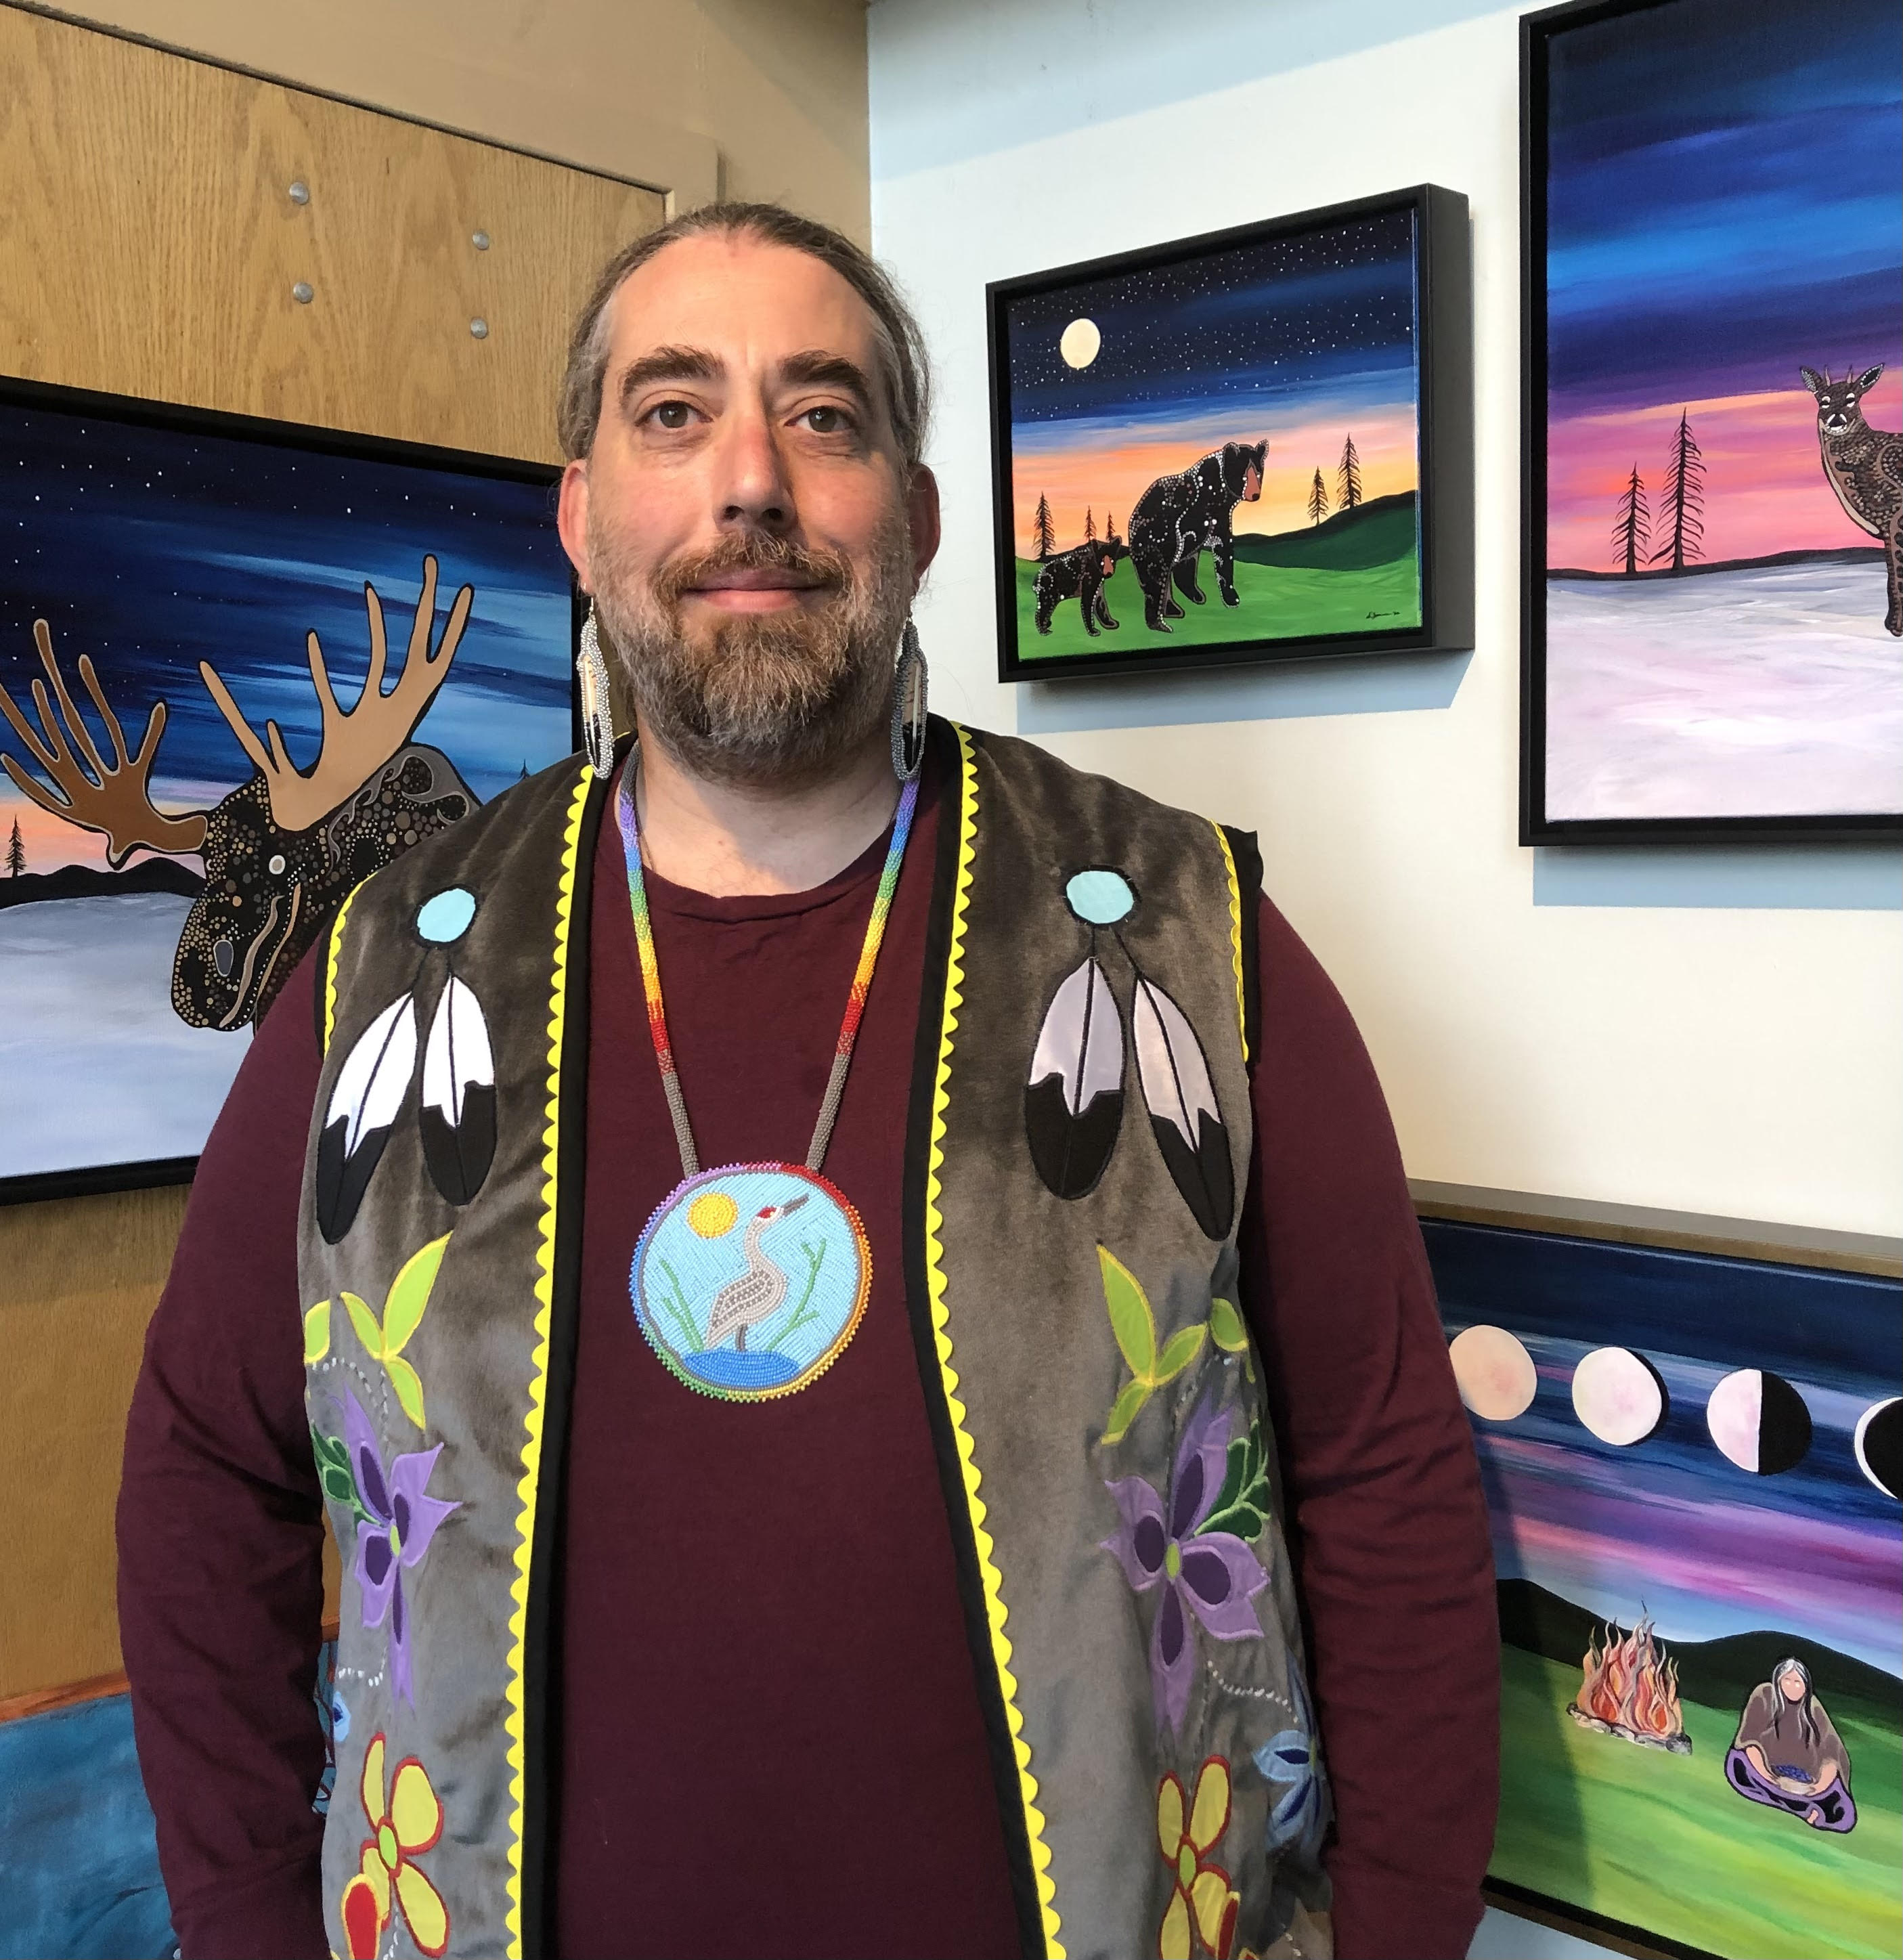 A man with a beard is wearing a colorful vest, bead necklace and red shirt stands in front of animal paintings.